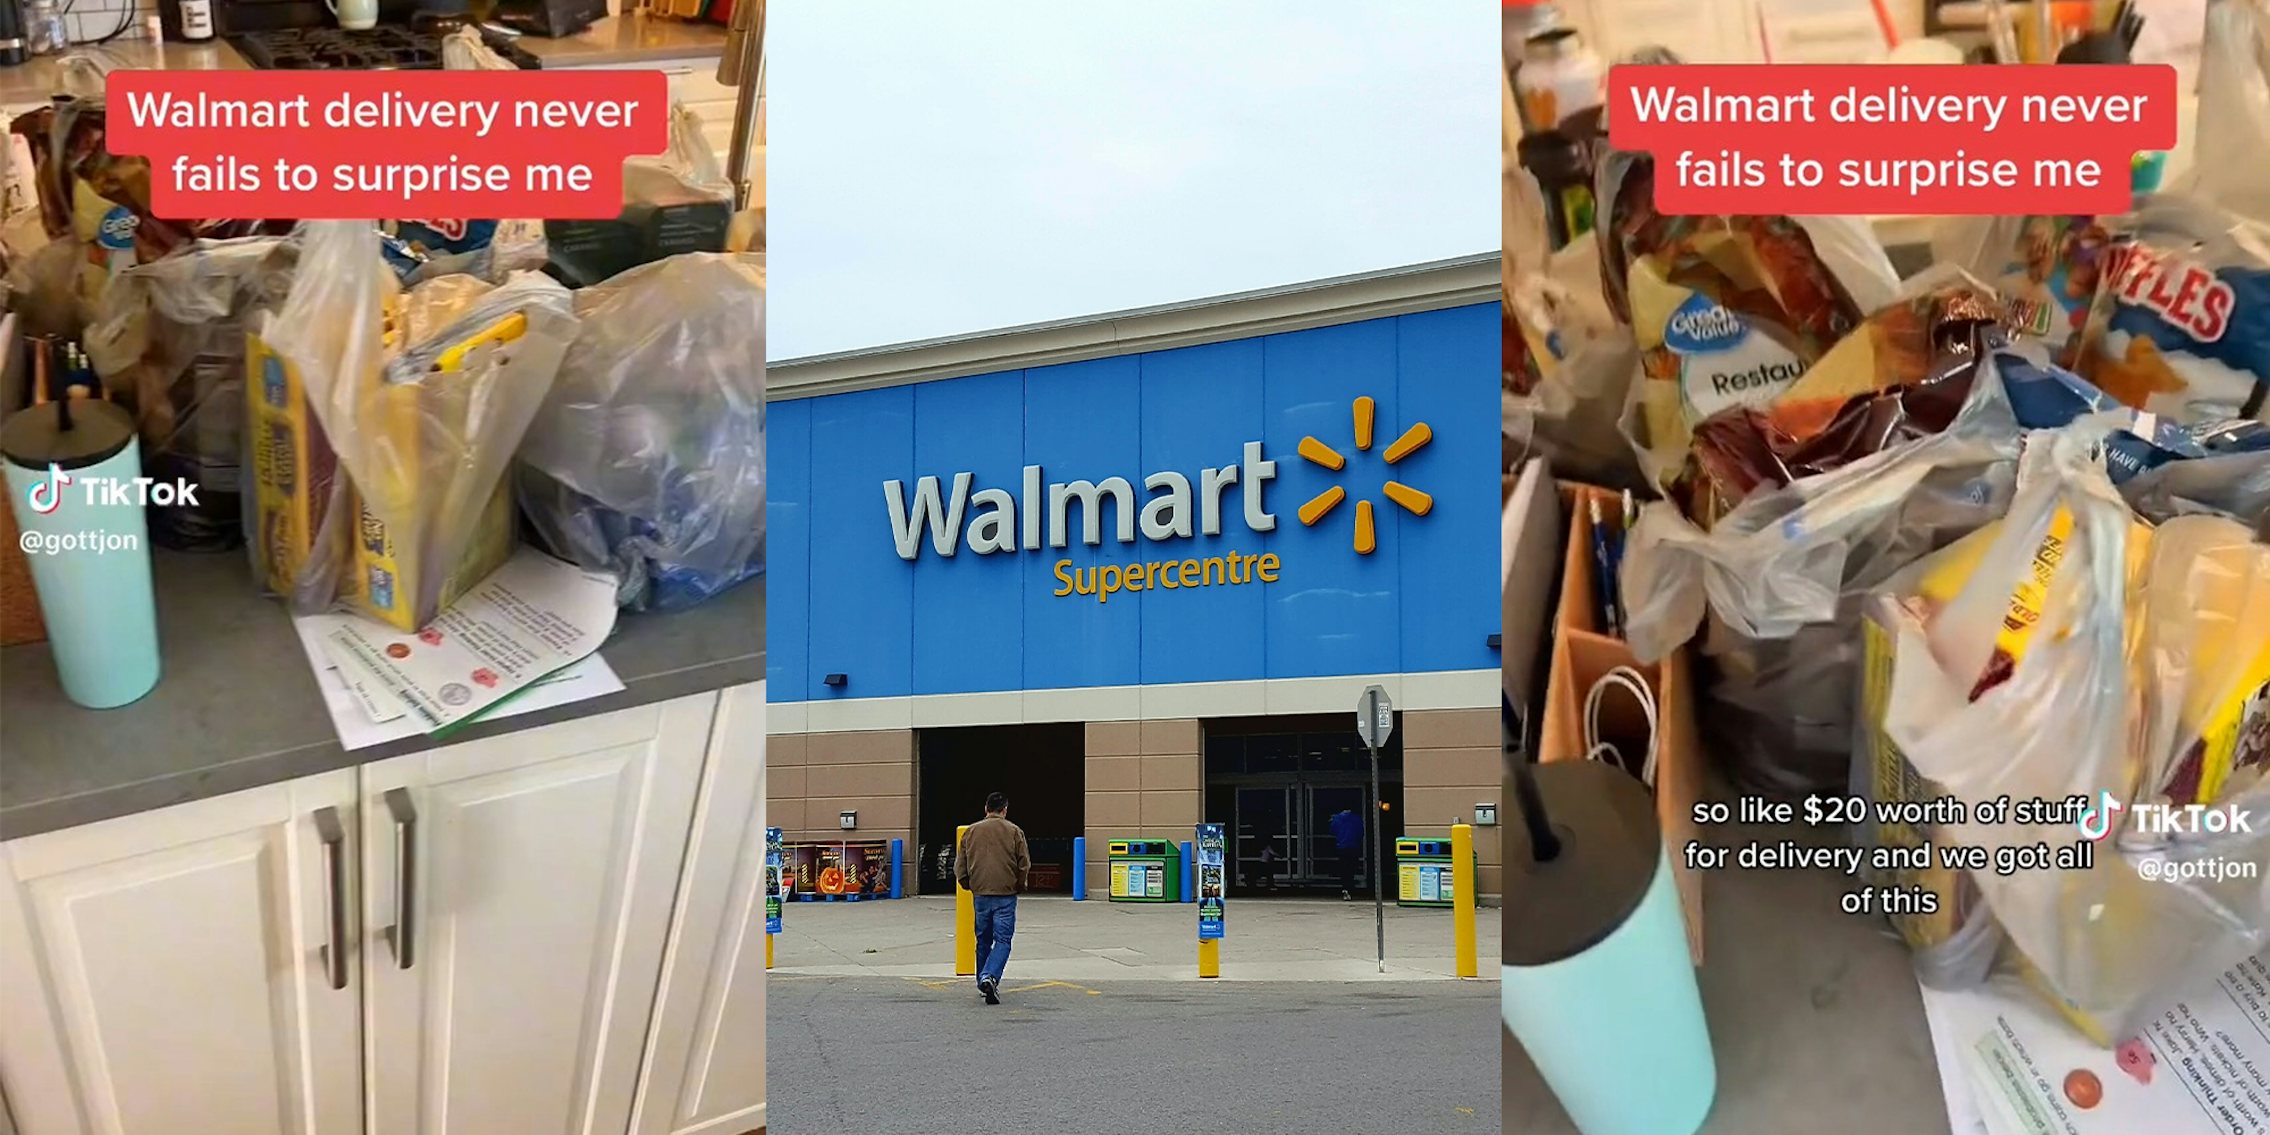 Customers explains that they placed a $20 Walmart delivery order—they receive someone else's massive order